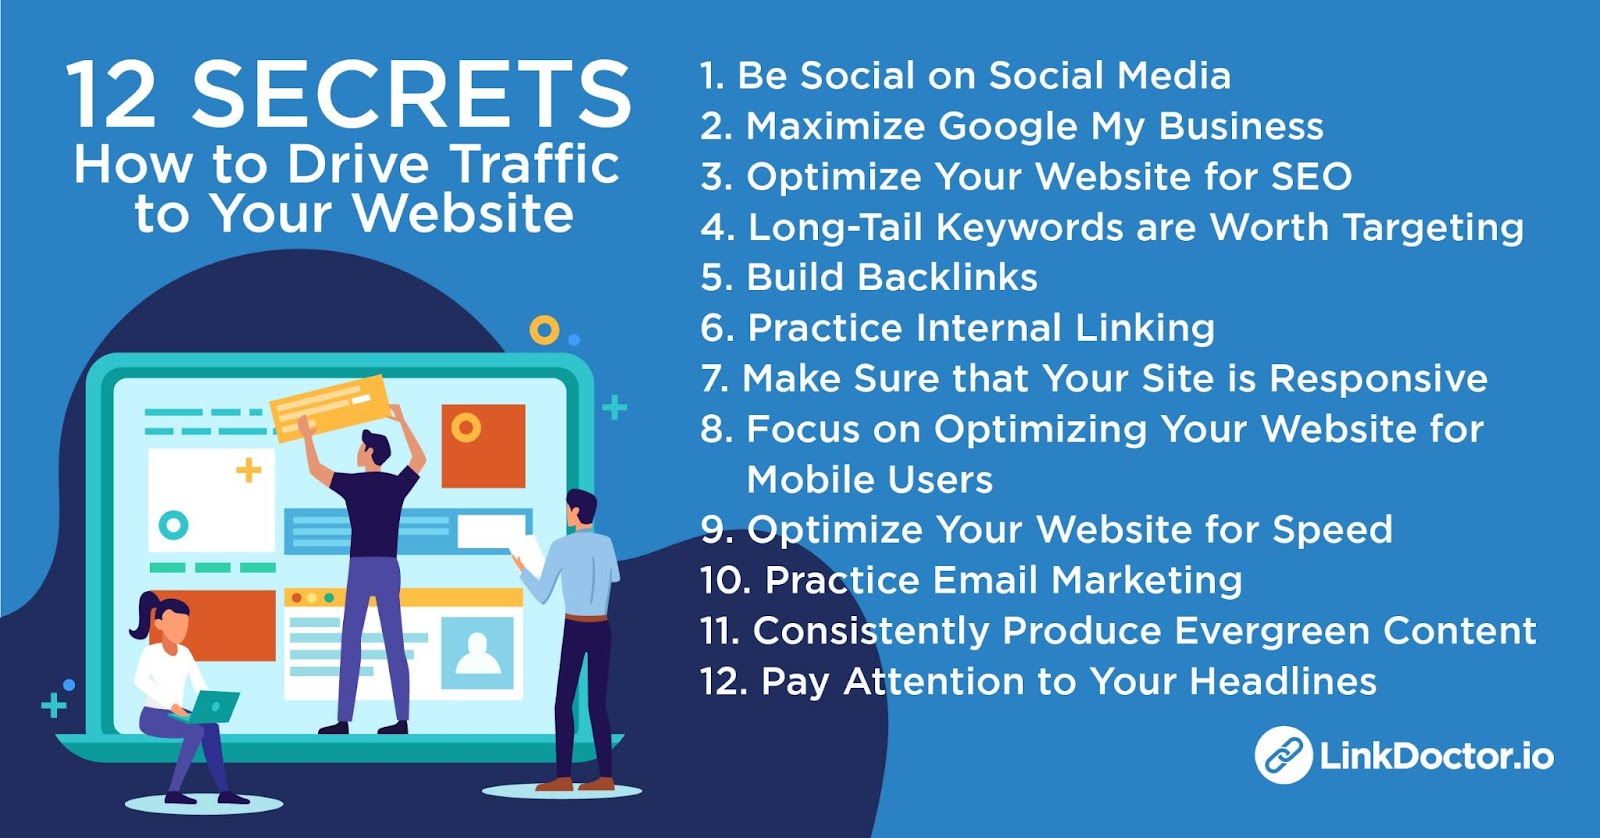 Summary of the 12 Secrets of How to Drive Traffic to Your Website